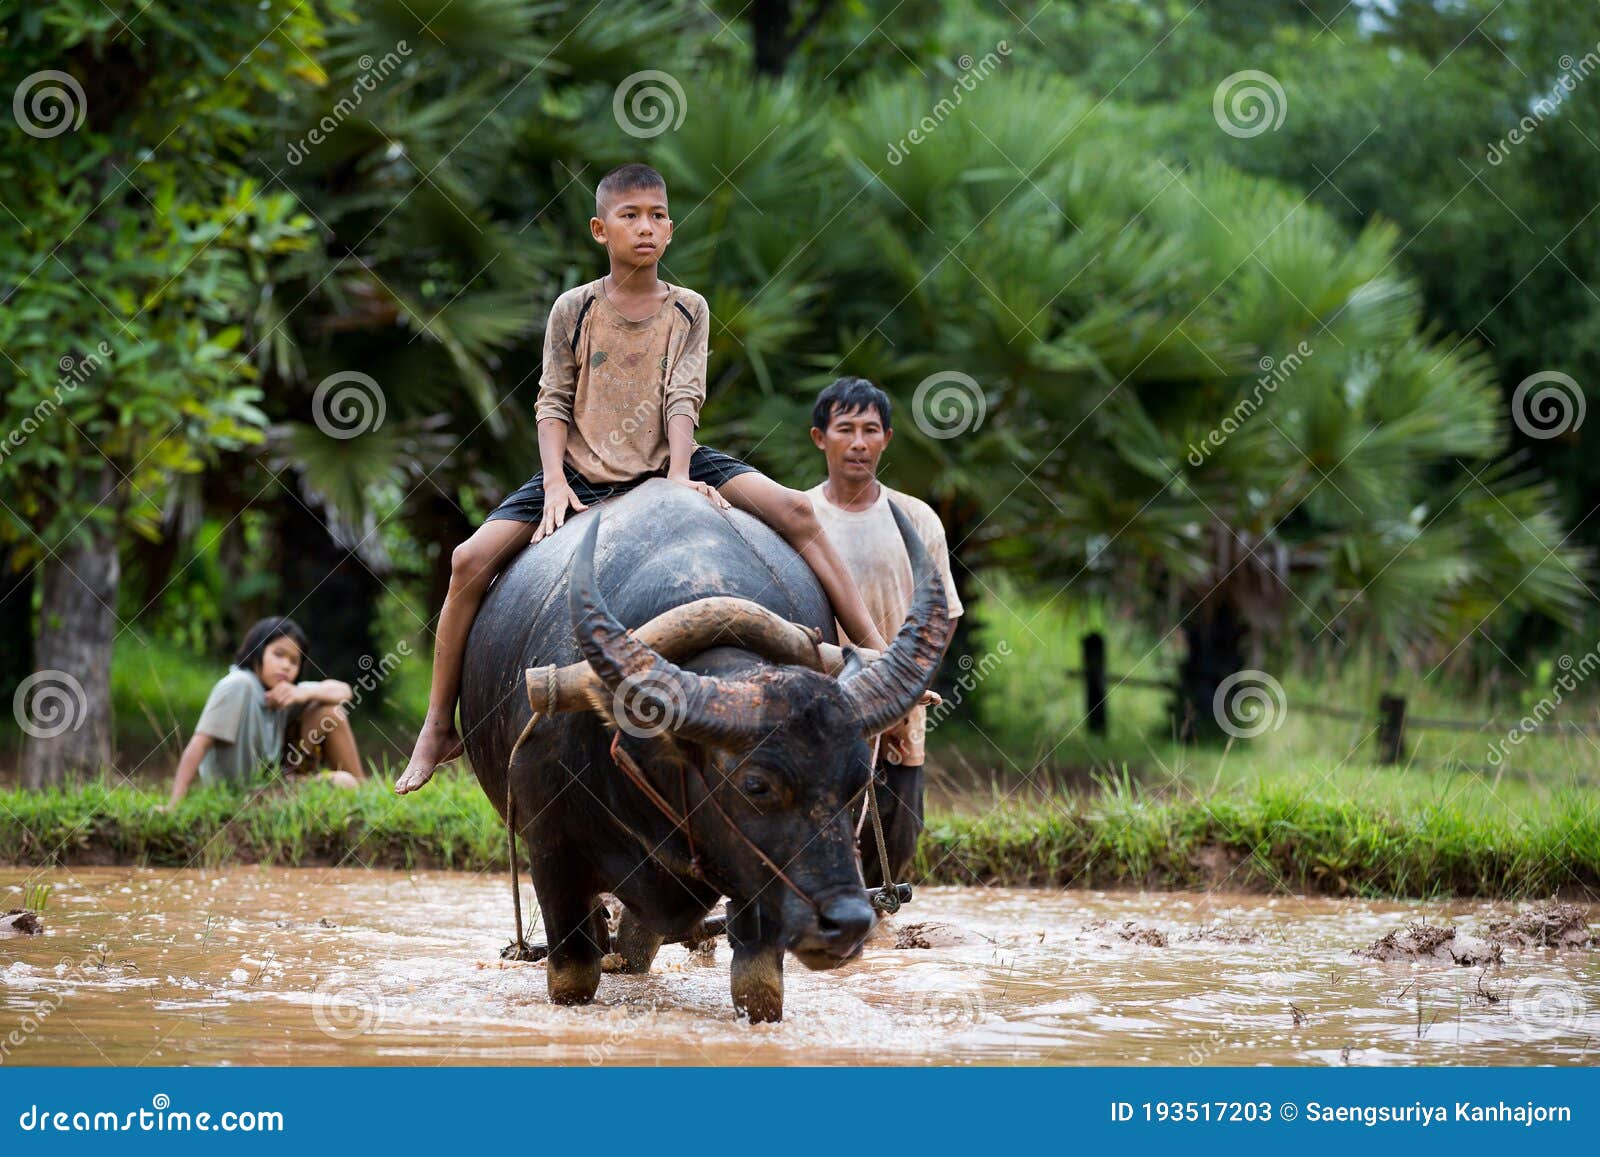 Girl Riding Buffalo - Free Royalty-Free Photos from Dreamstime